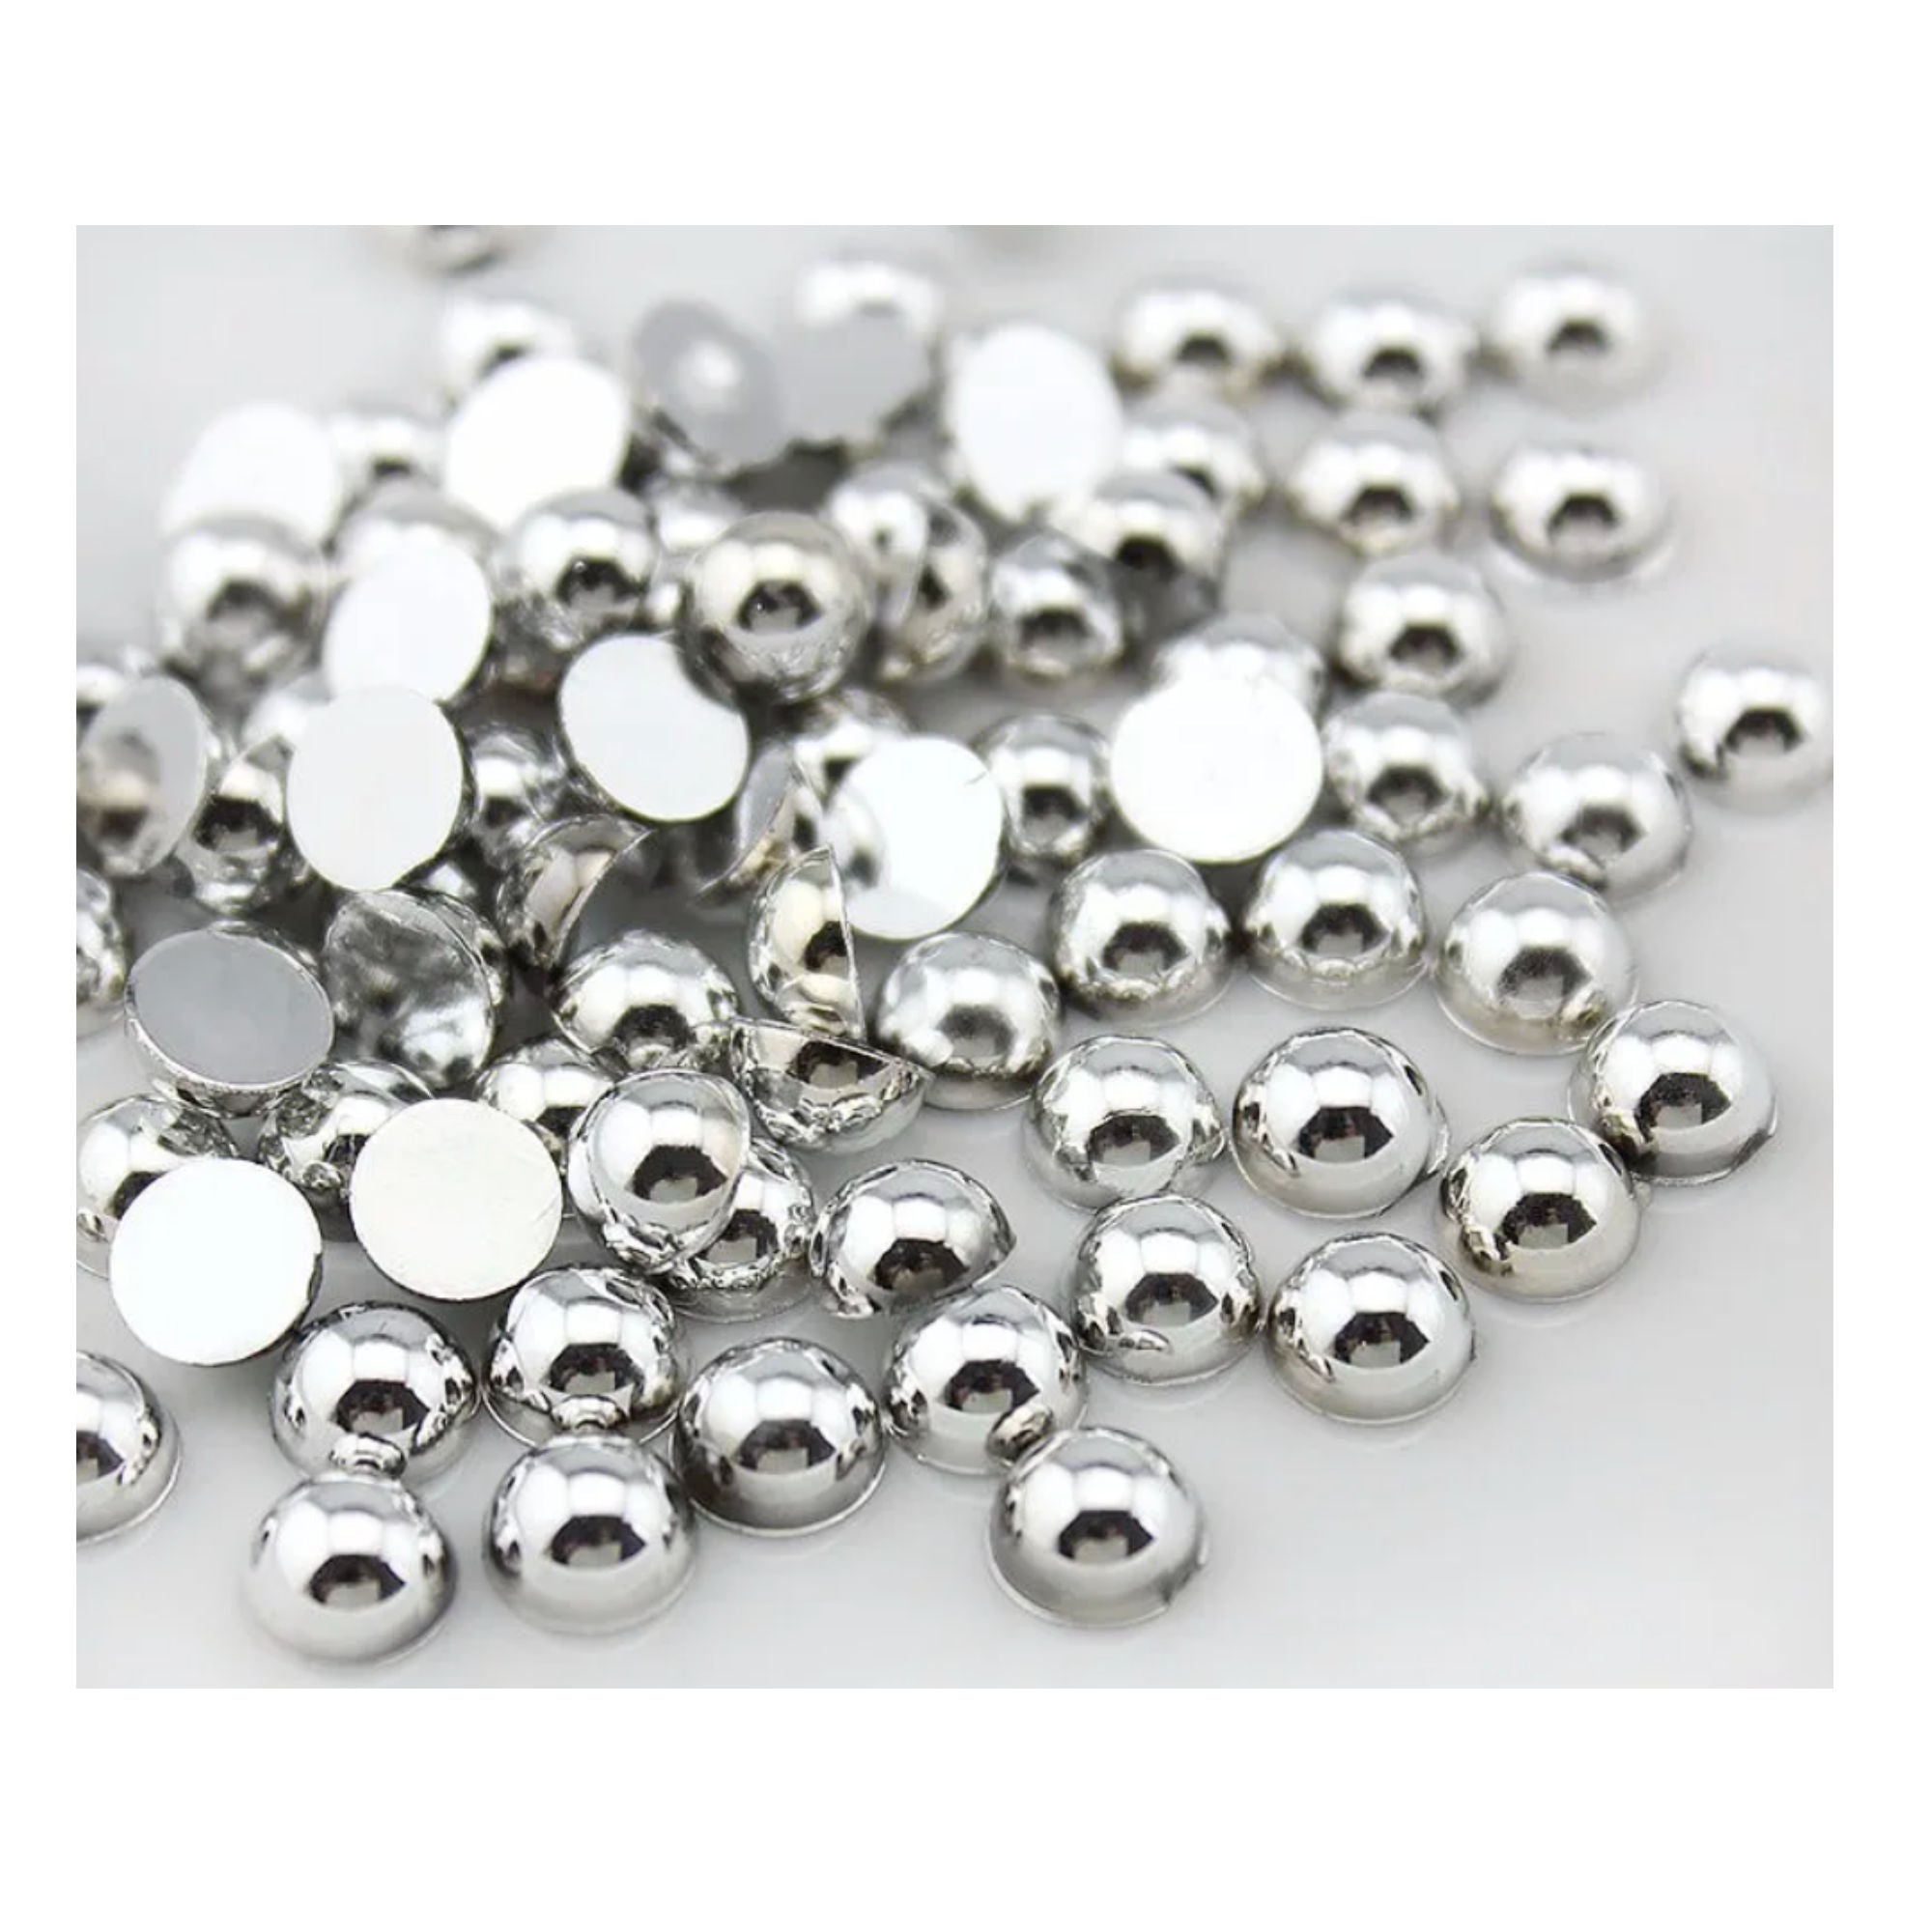 Silver Chrome 6mm AB Flatback Pearls by SSC Designs - 100/Package